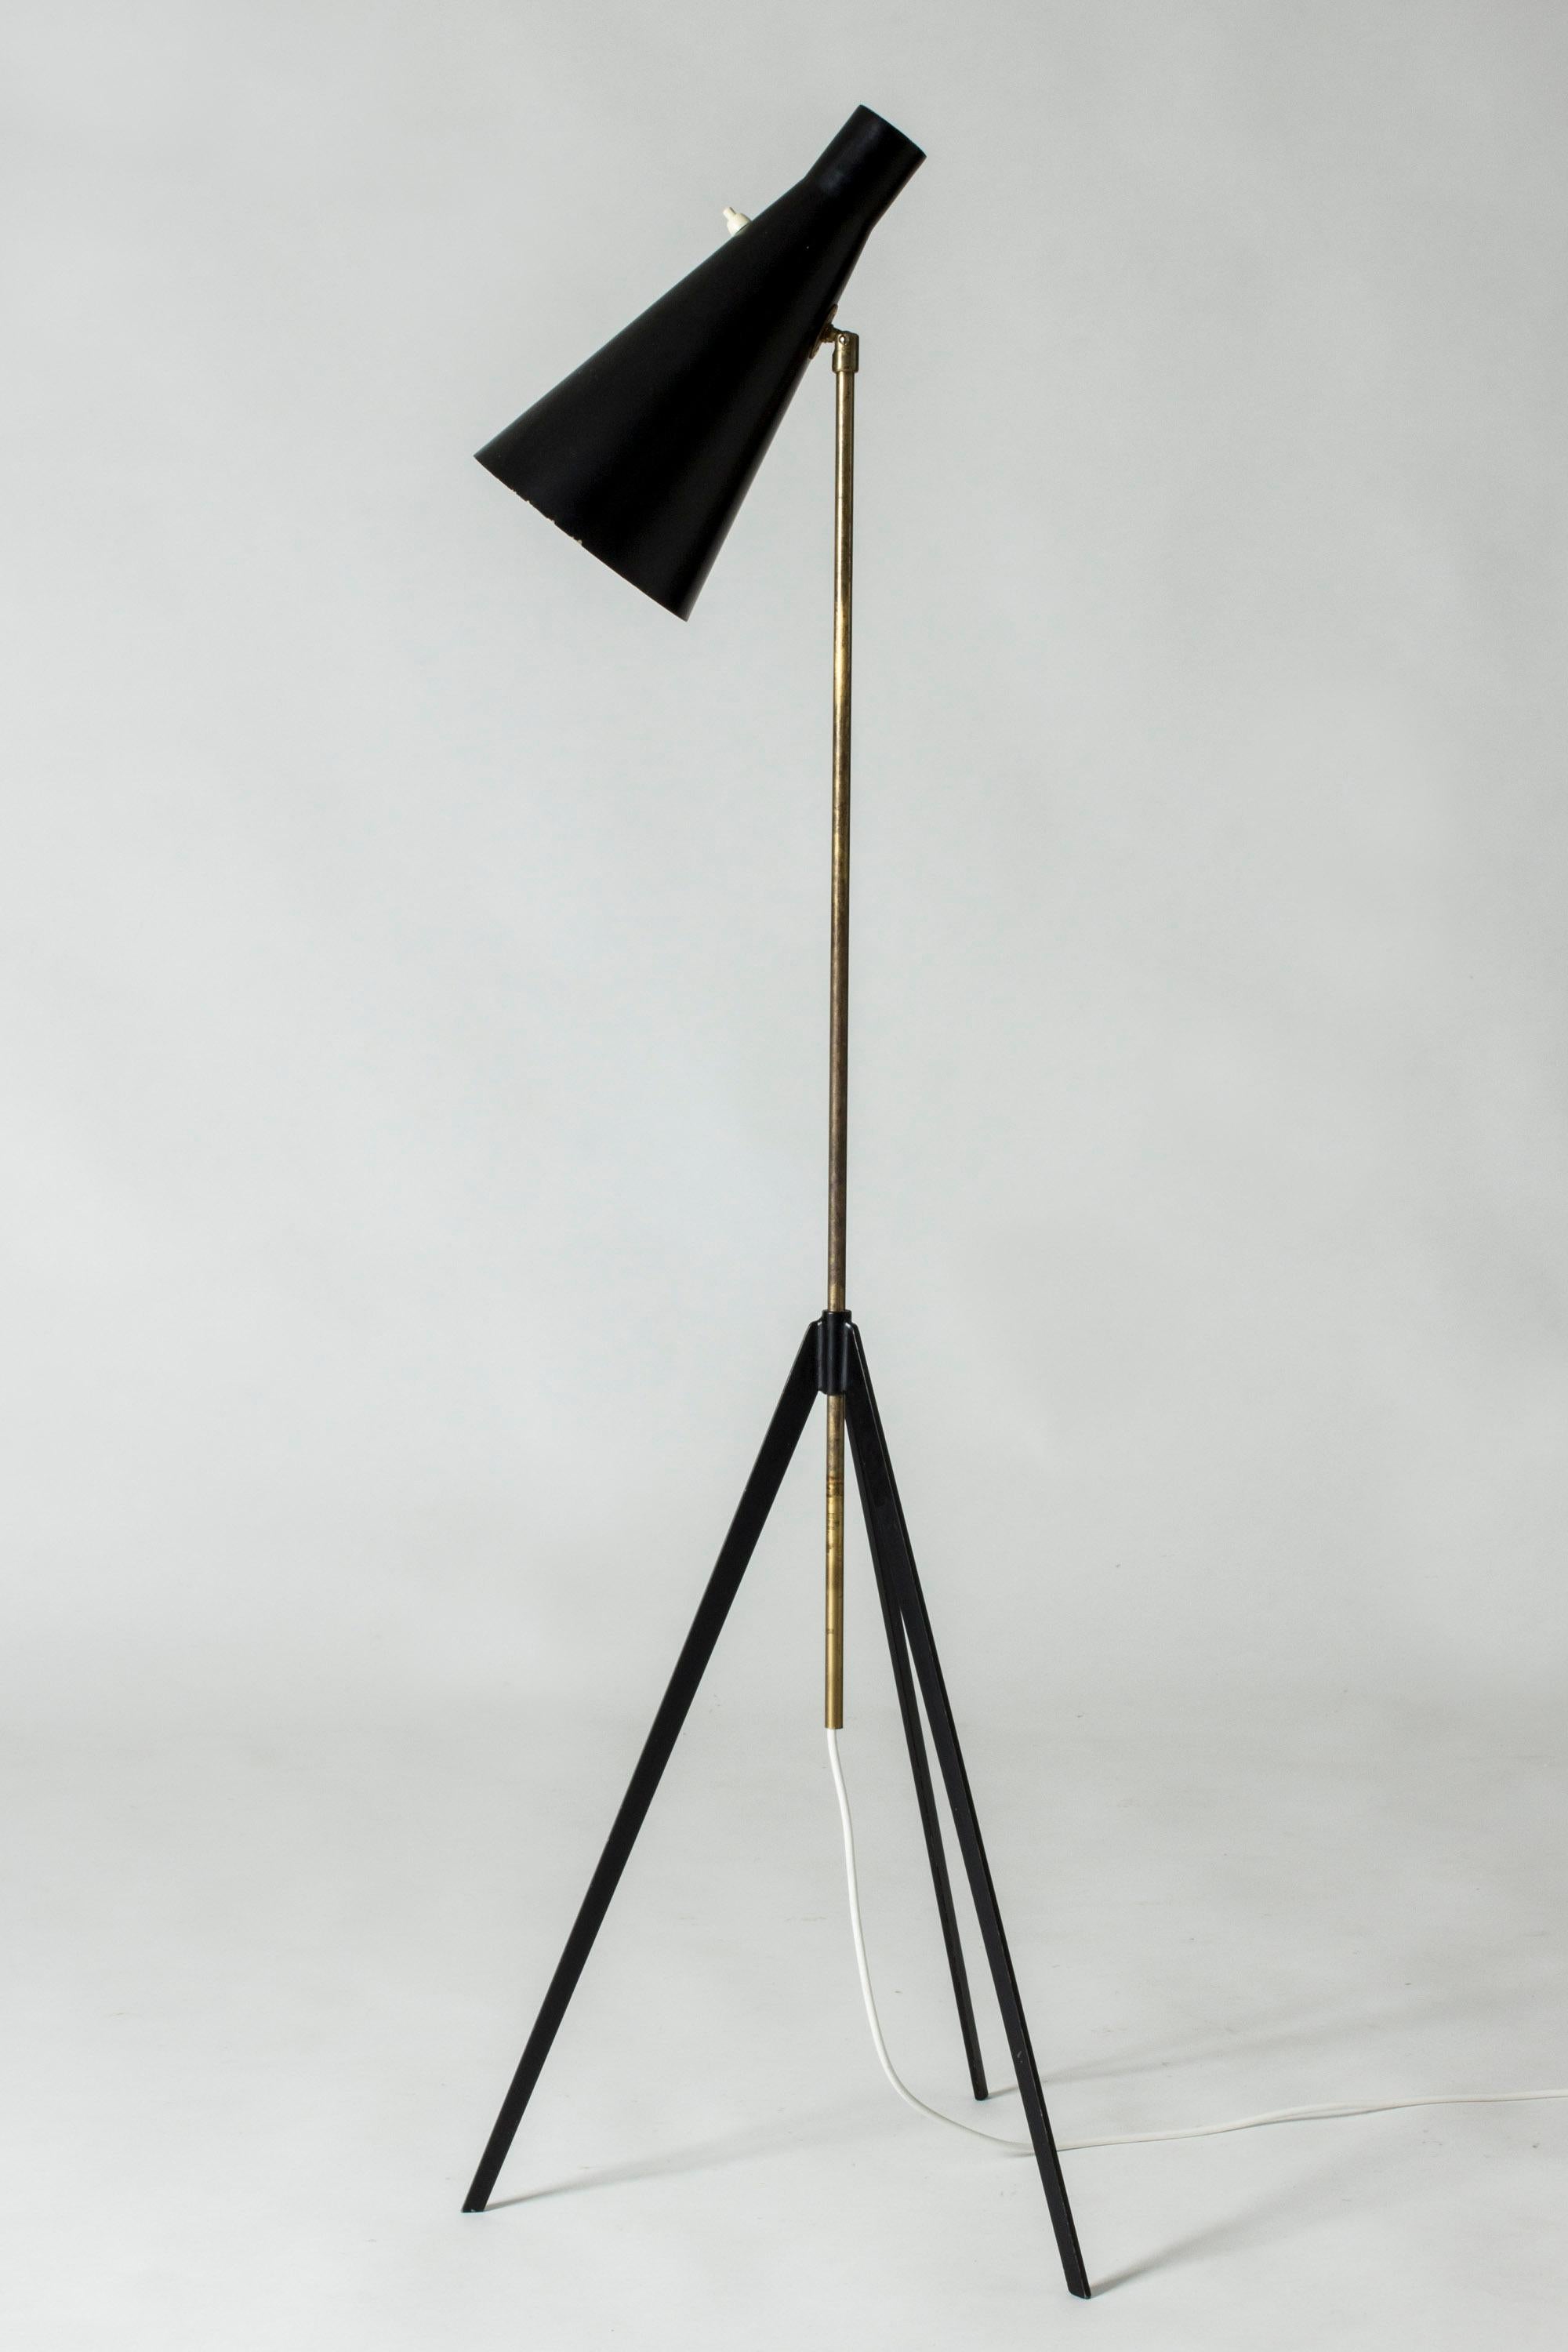 Cool brass and black lacquered metal floor lamp by Alf Svensson. Minimalistic, distinct design with a sharp-cut tripod base.